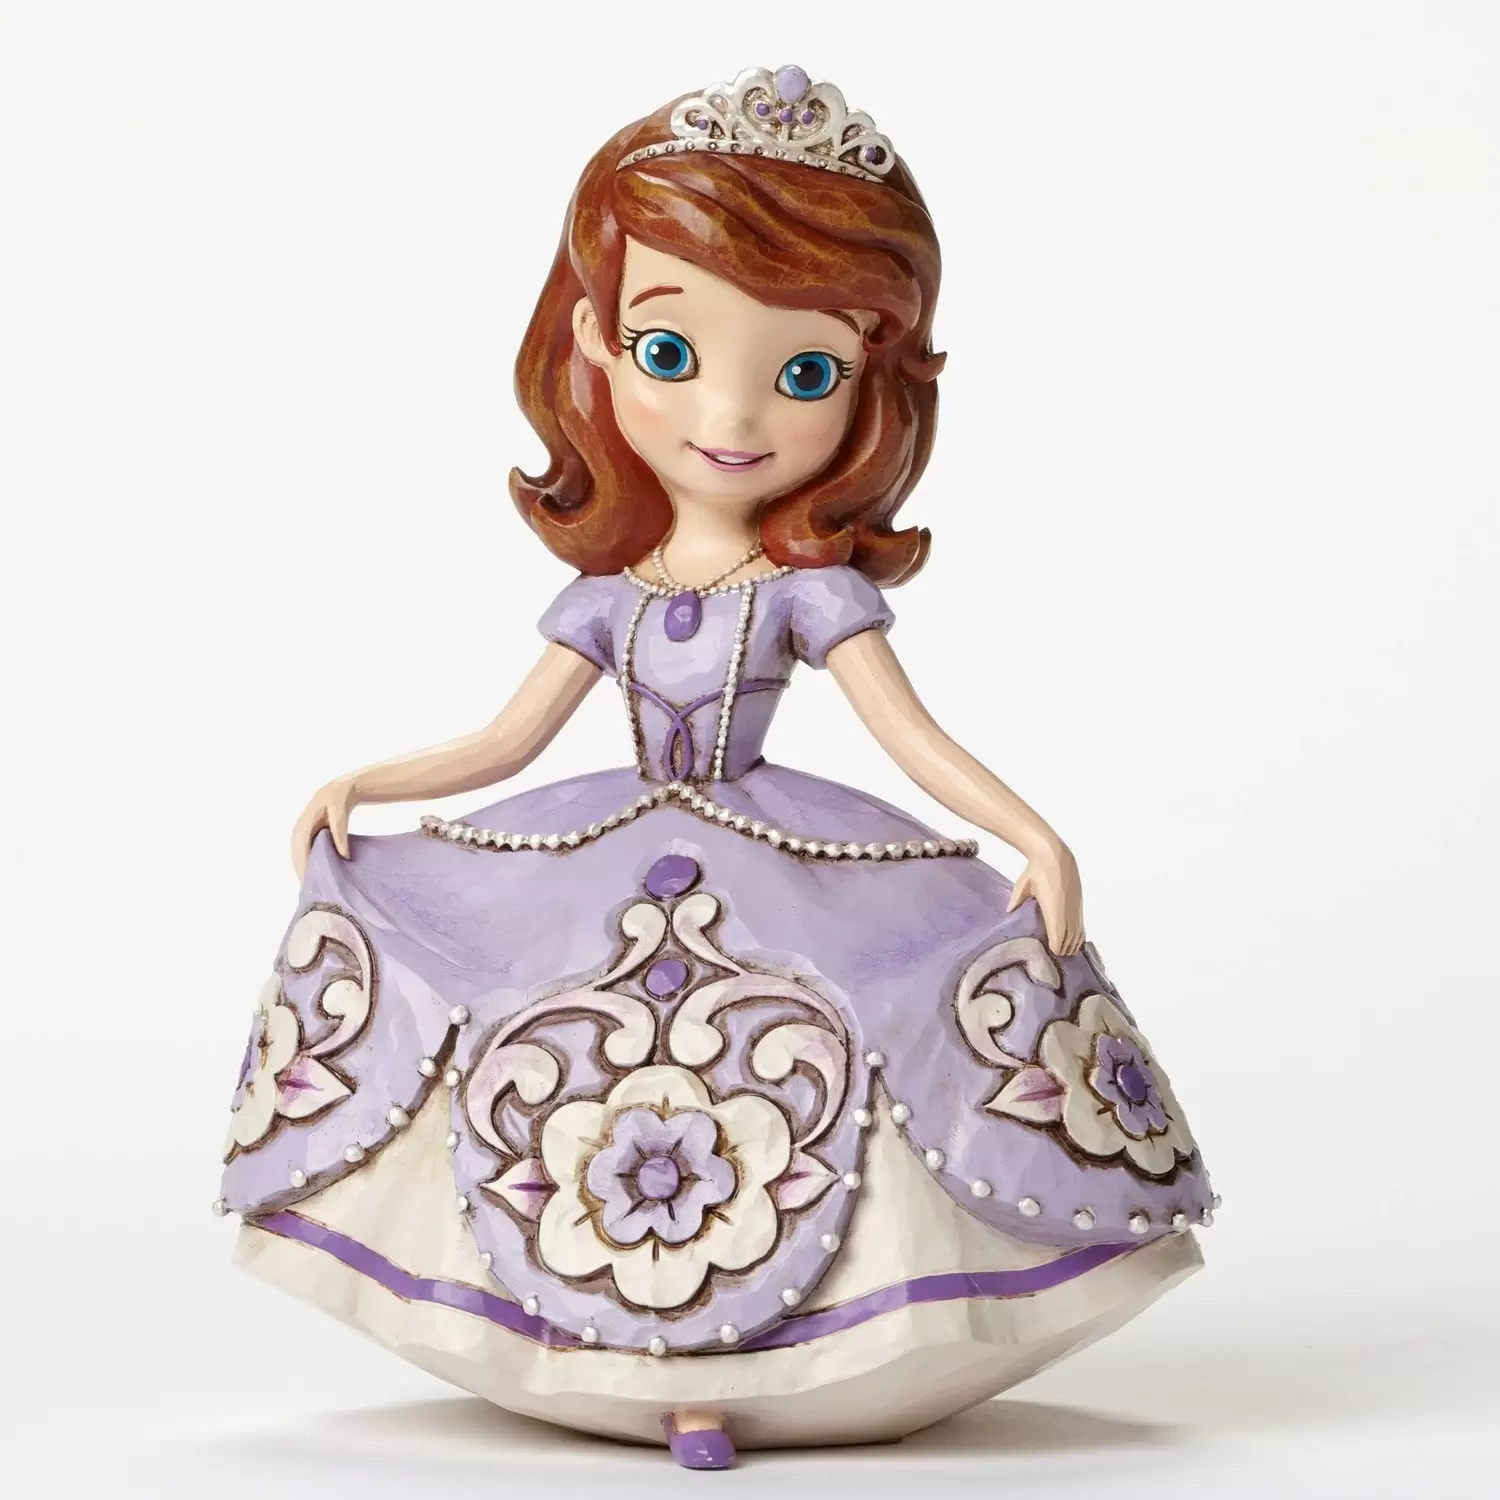 Disney Traditions by Jim Shore - The New Girl in Crown - Princess Sofia the First